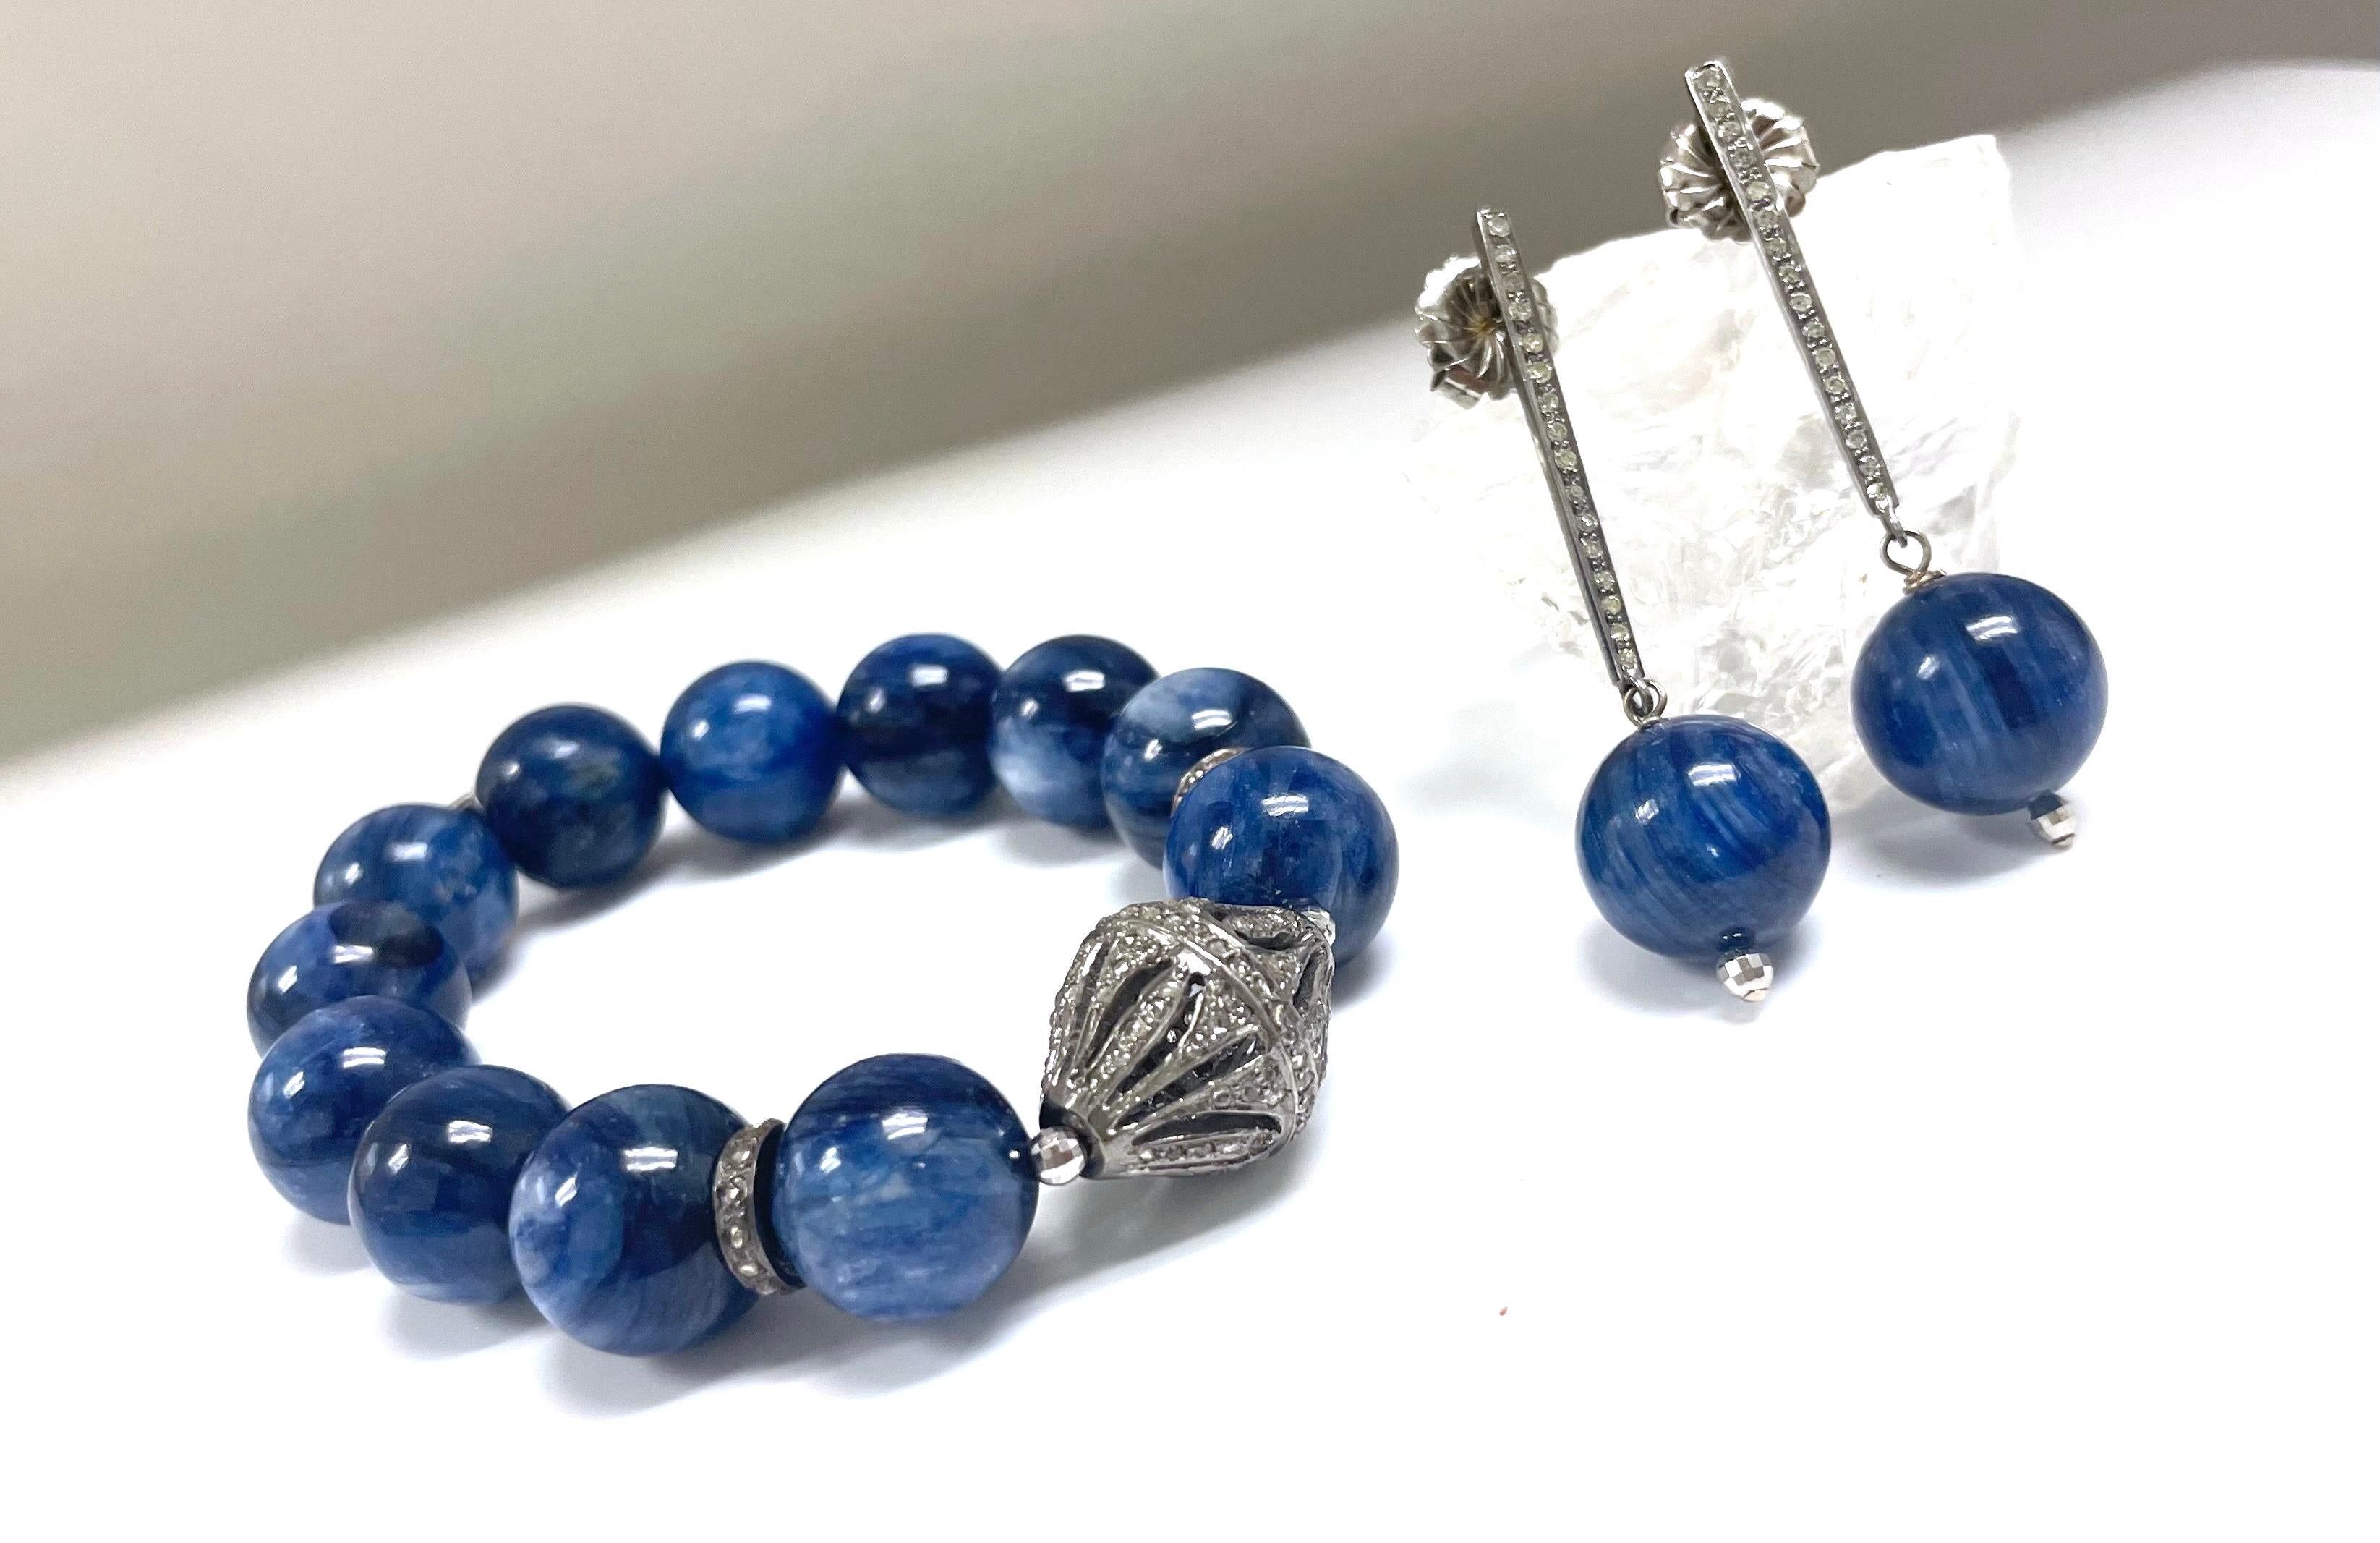 Description
Understated, yet elegant indigo blue color chatoyant Kyanite earrings. The beauty of the earrings is expressed in the details of the faceted ball and the tapered pave diamond bar/post. 
Item #E3071
Check out matching bracelet, Item#